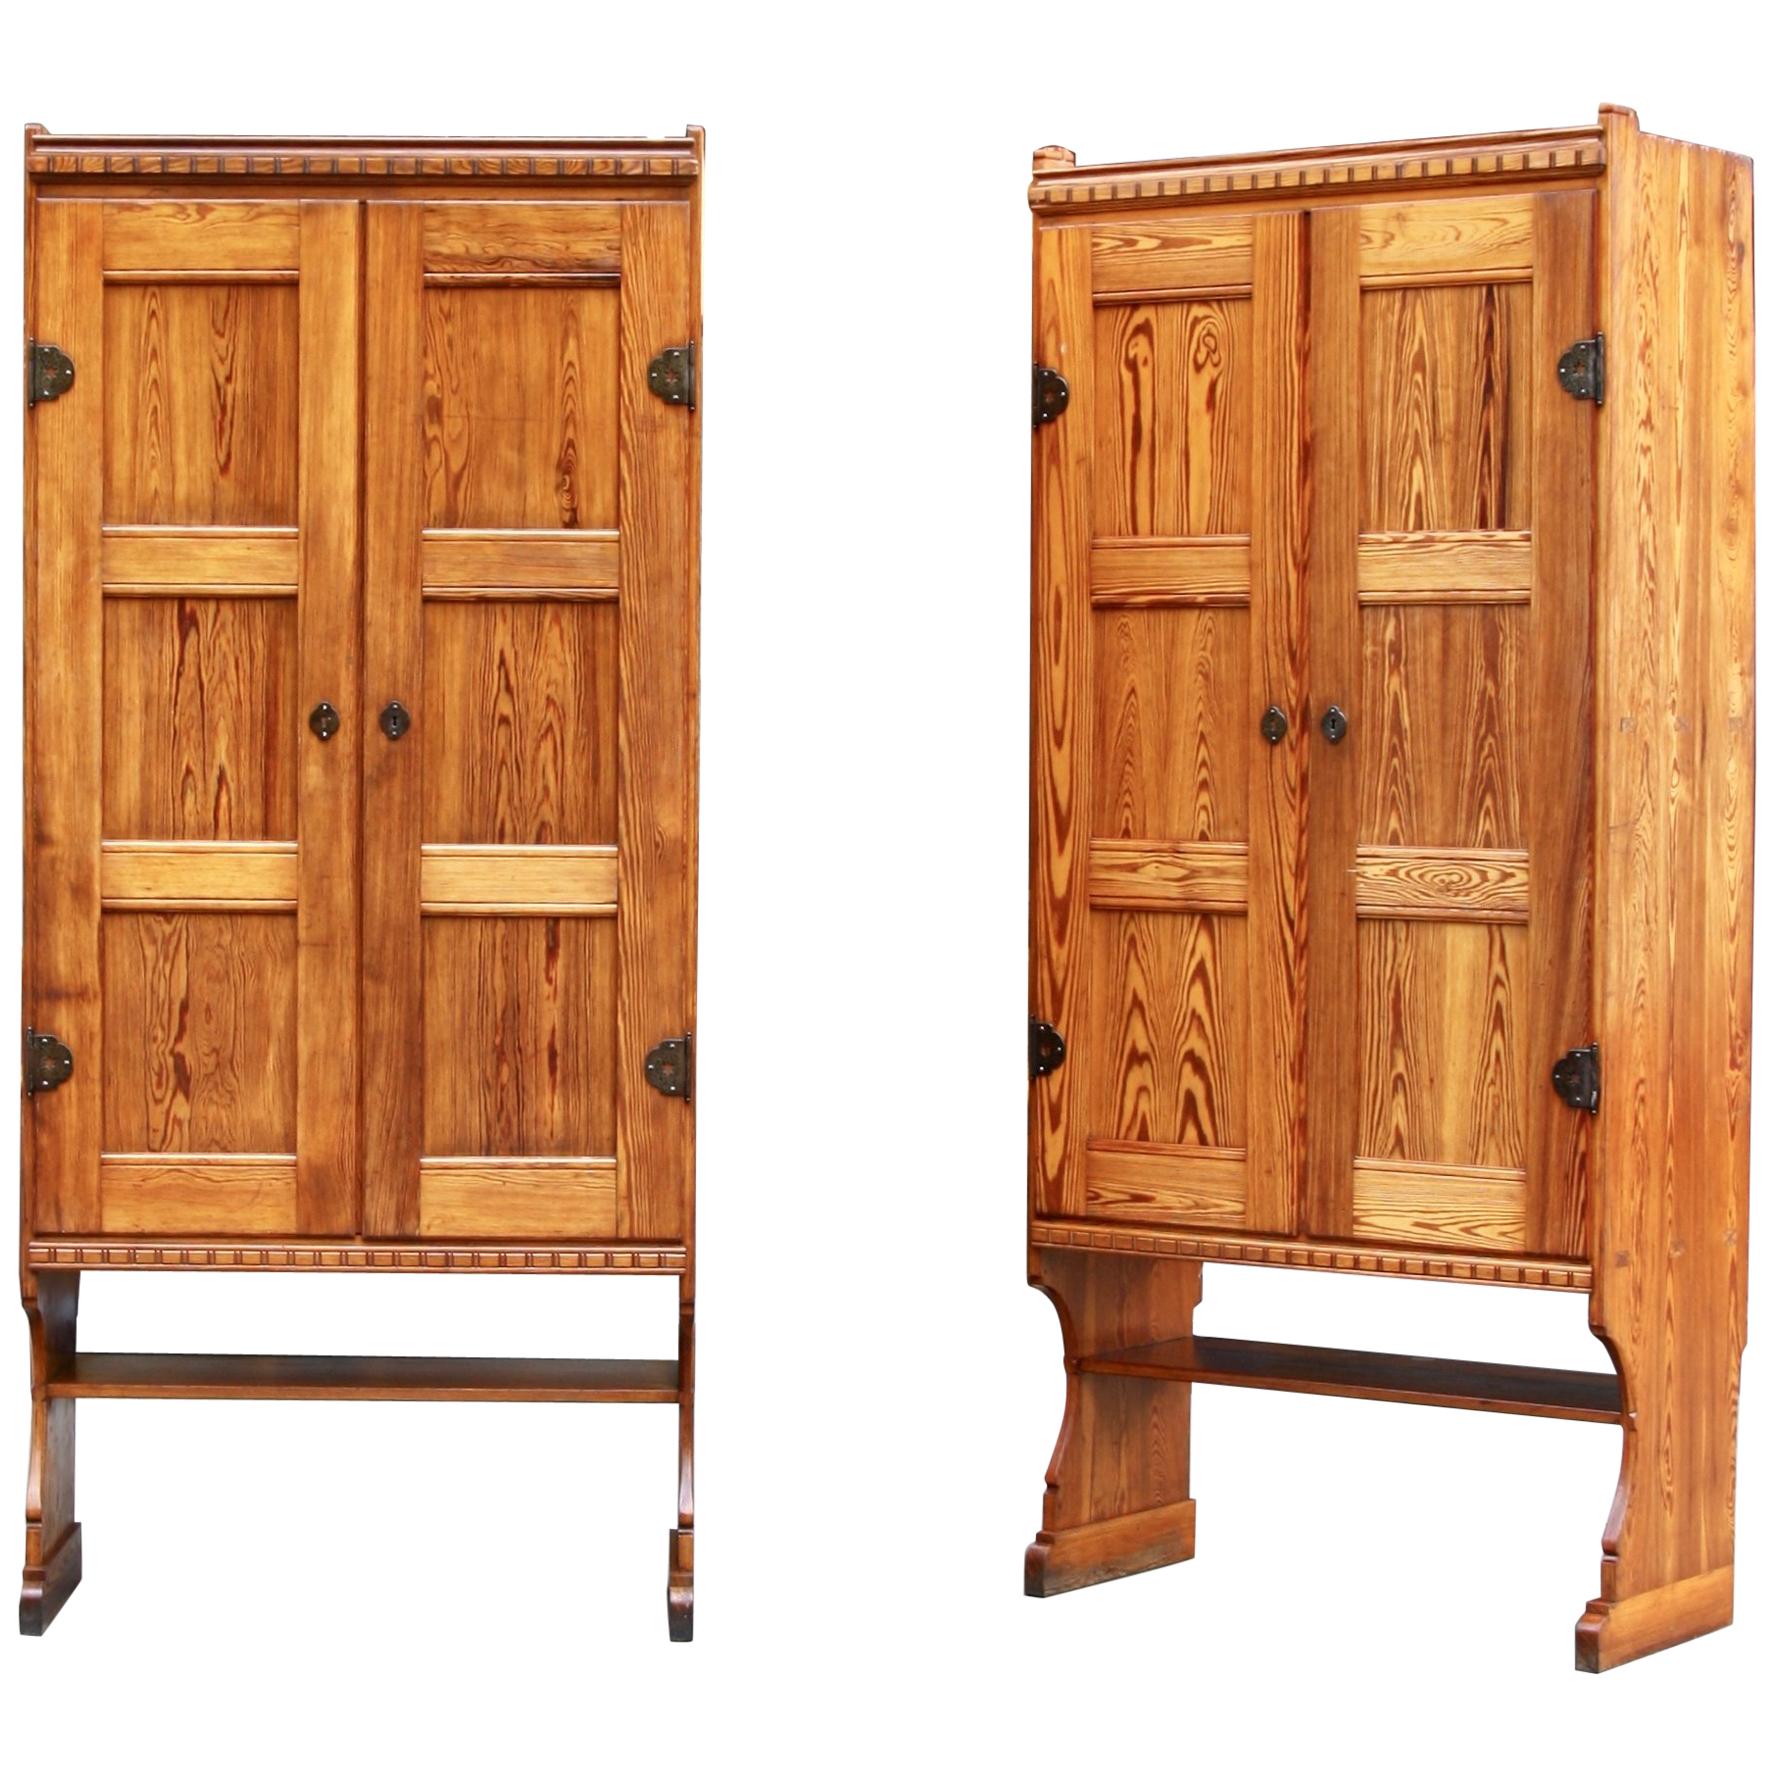 Pair of Large Important Cabinets by Martin Nyrop & Rud. Rasmussen for City Hall